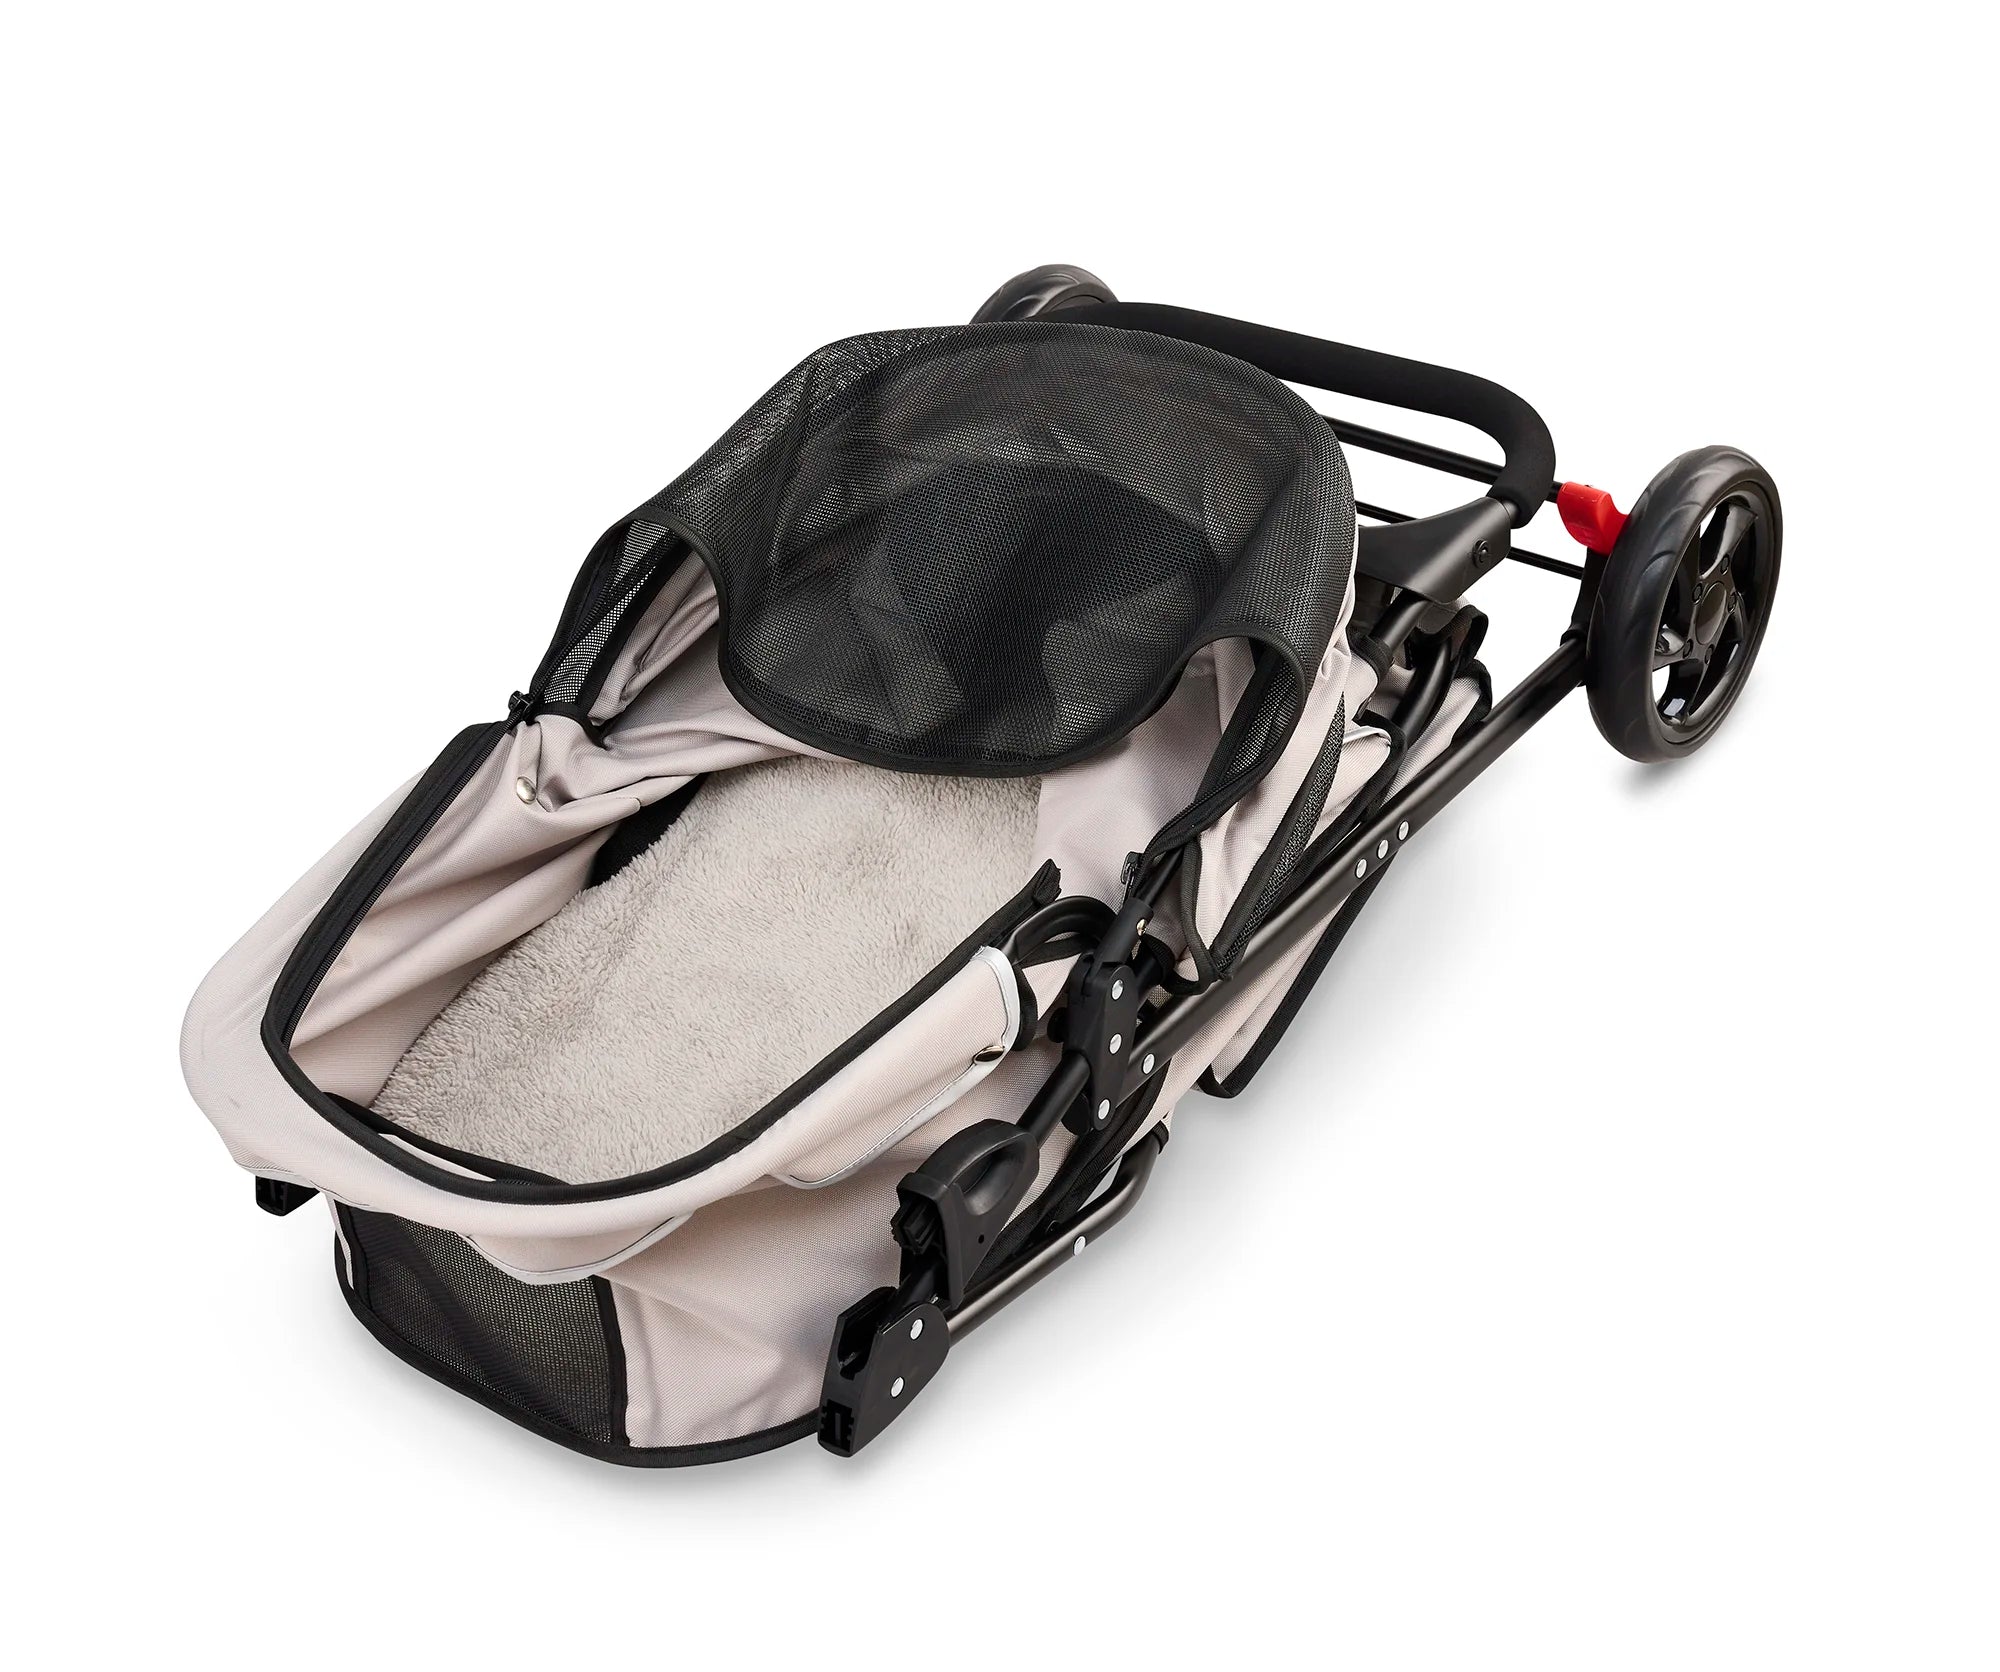 Portable Pup Pet Stroller on white background.